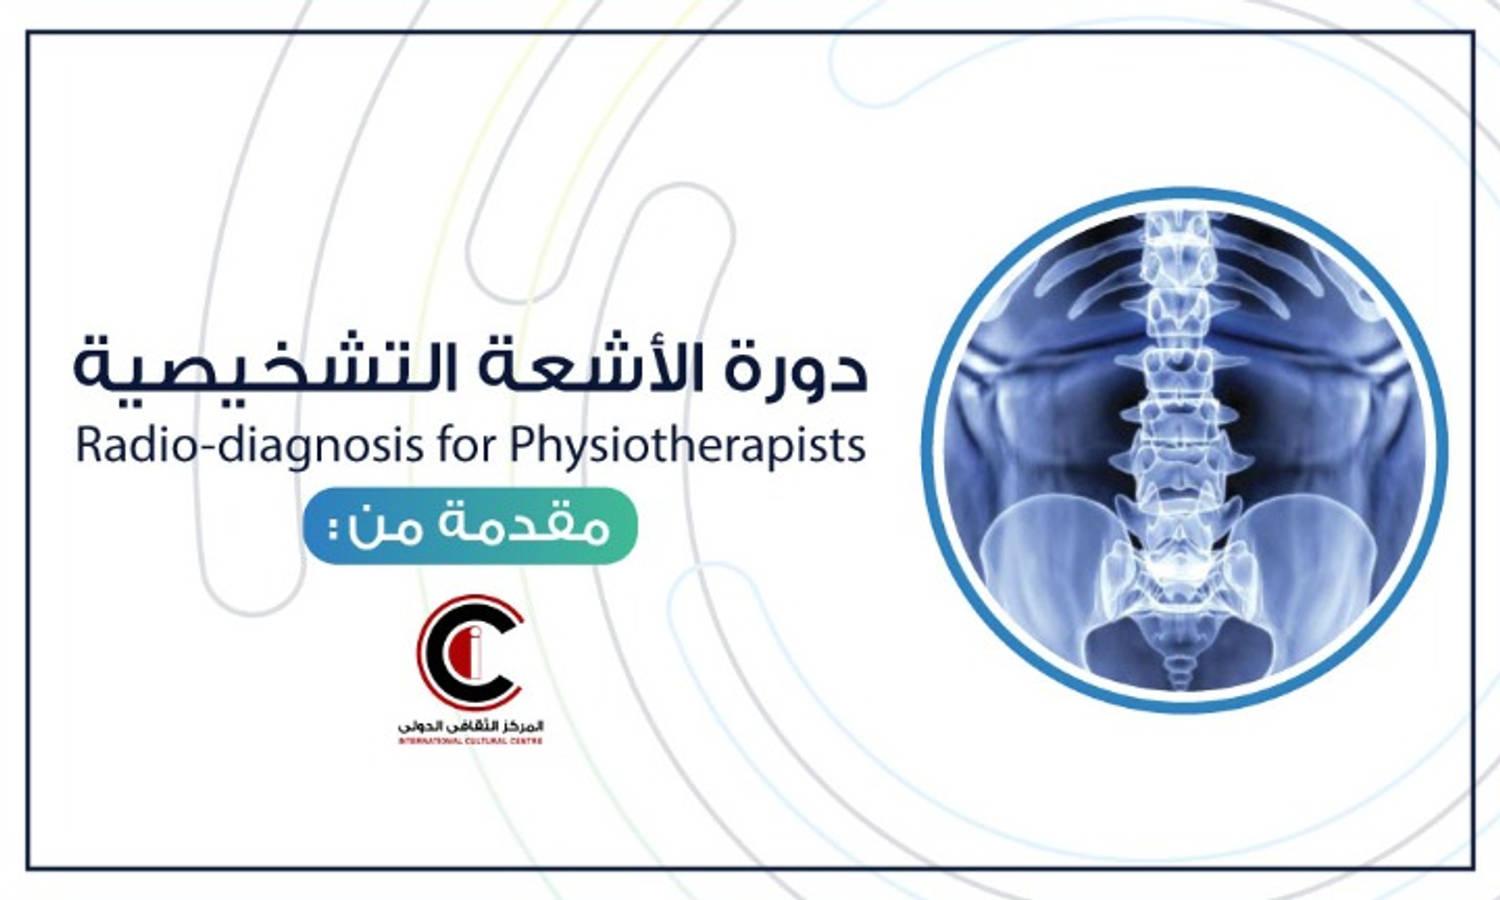 Radio-diagnosis for Physiotherapists